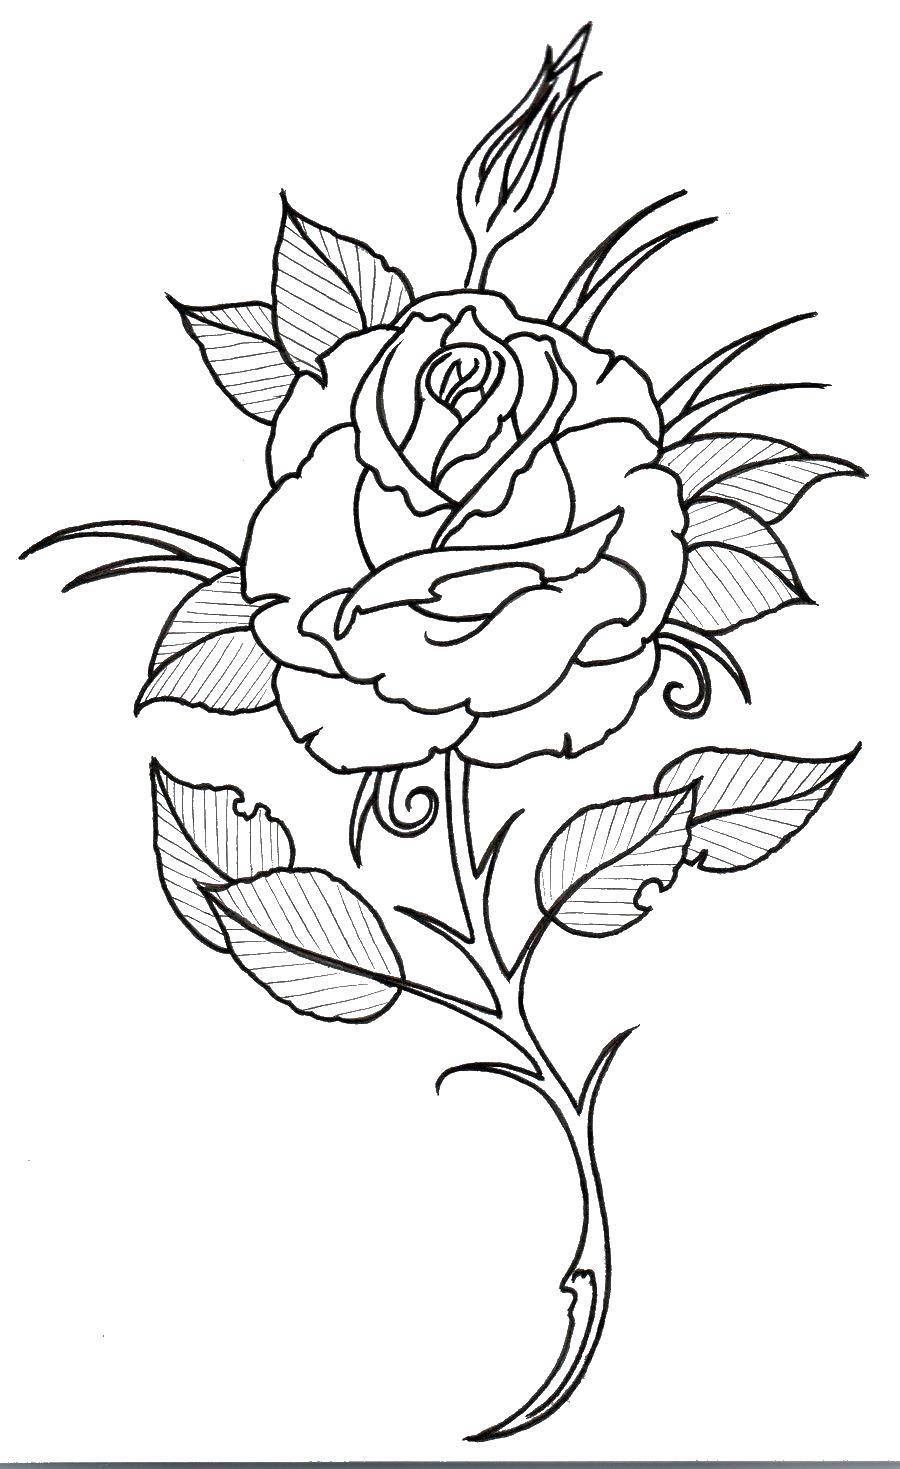 Coloring Roses. Category The contours of a rose. Tags:  rose, flowers.